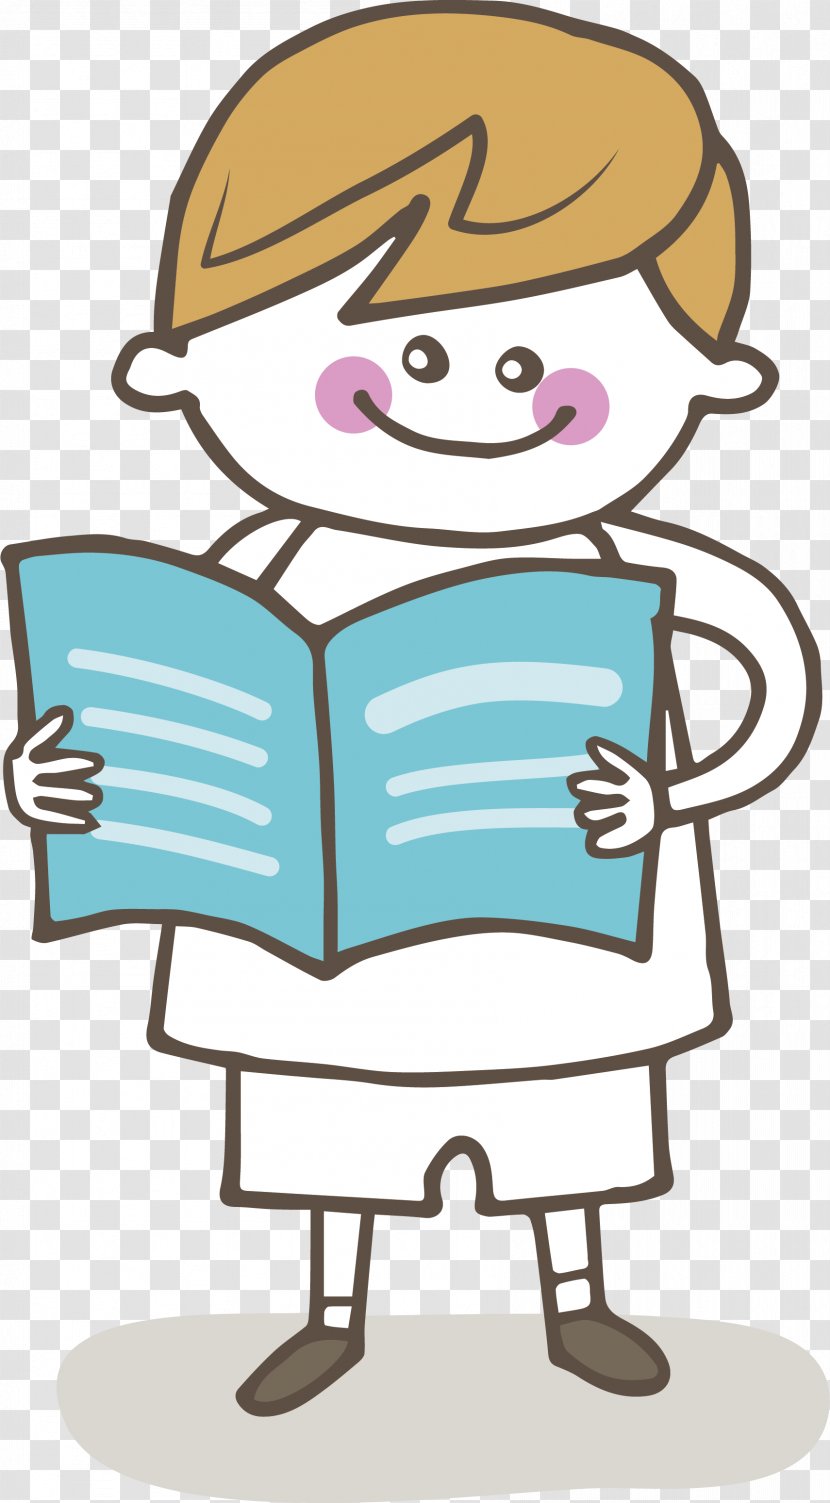 Clip Art - Happiness - A Child With Book In Hand Transparent PNG